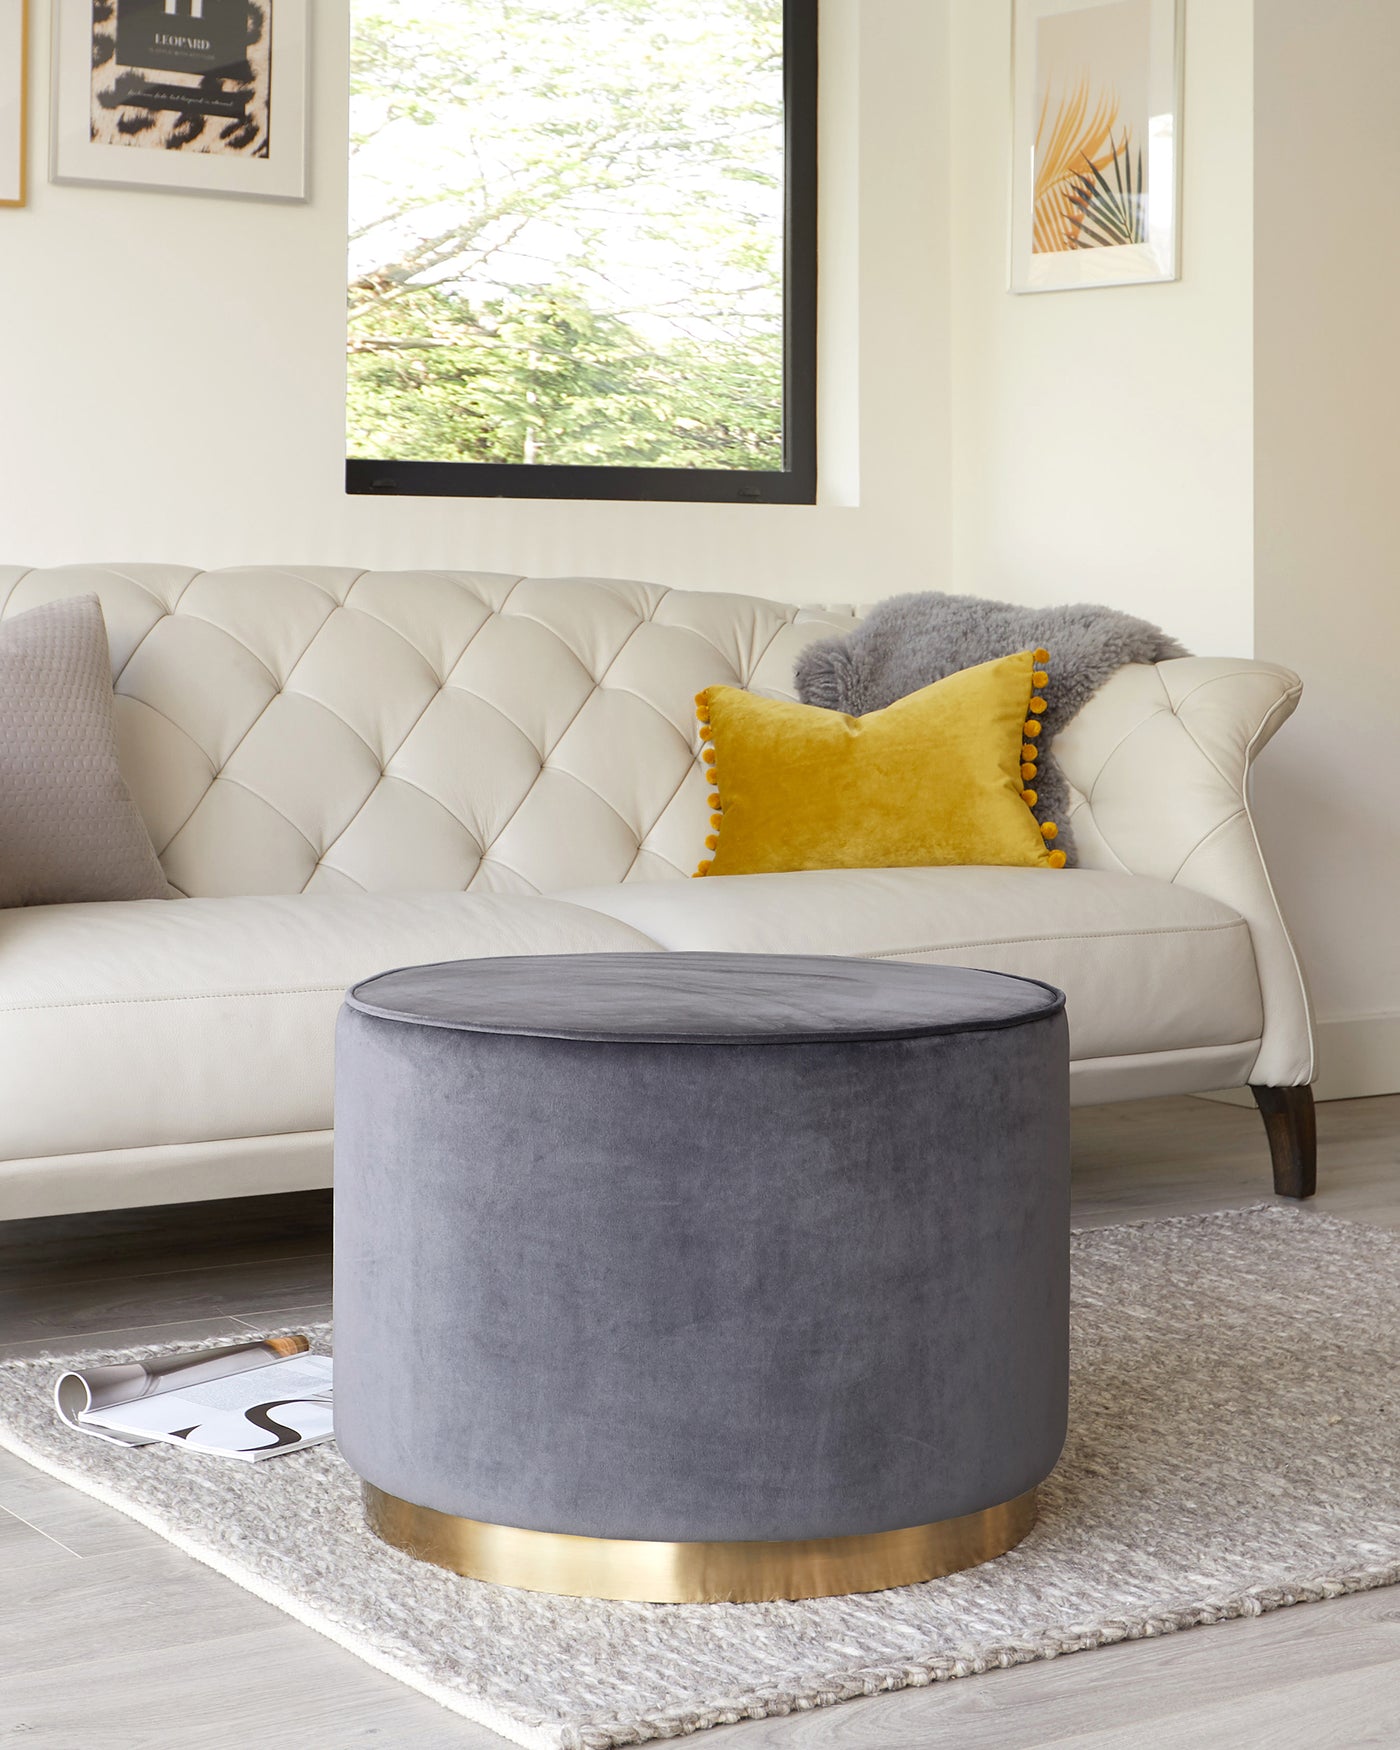 Elegant ivory tufted back sofa accompanied by a round, grey upholstered ottoman with a golden metal base, accented with colourful throw pillows and situated on a textured grey area rug.